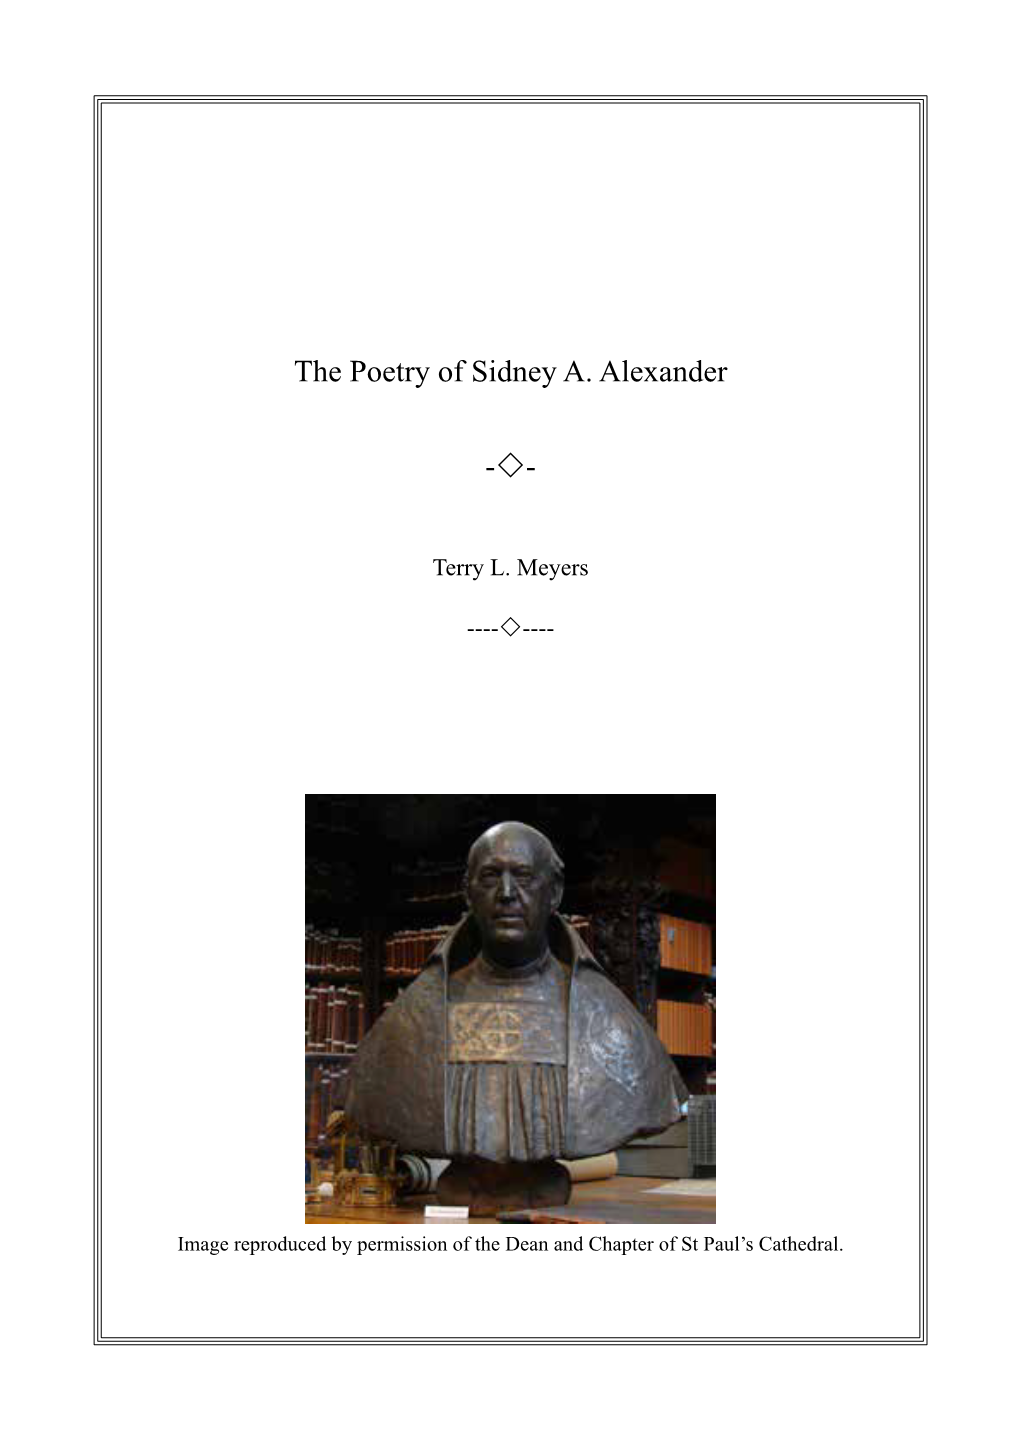 The Poetry of Sidney A. Alexander